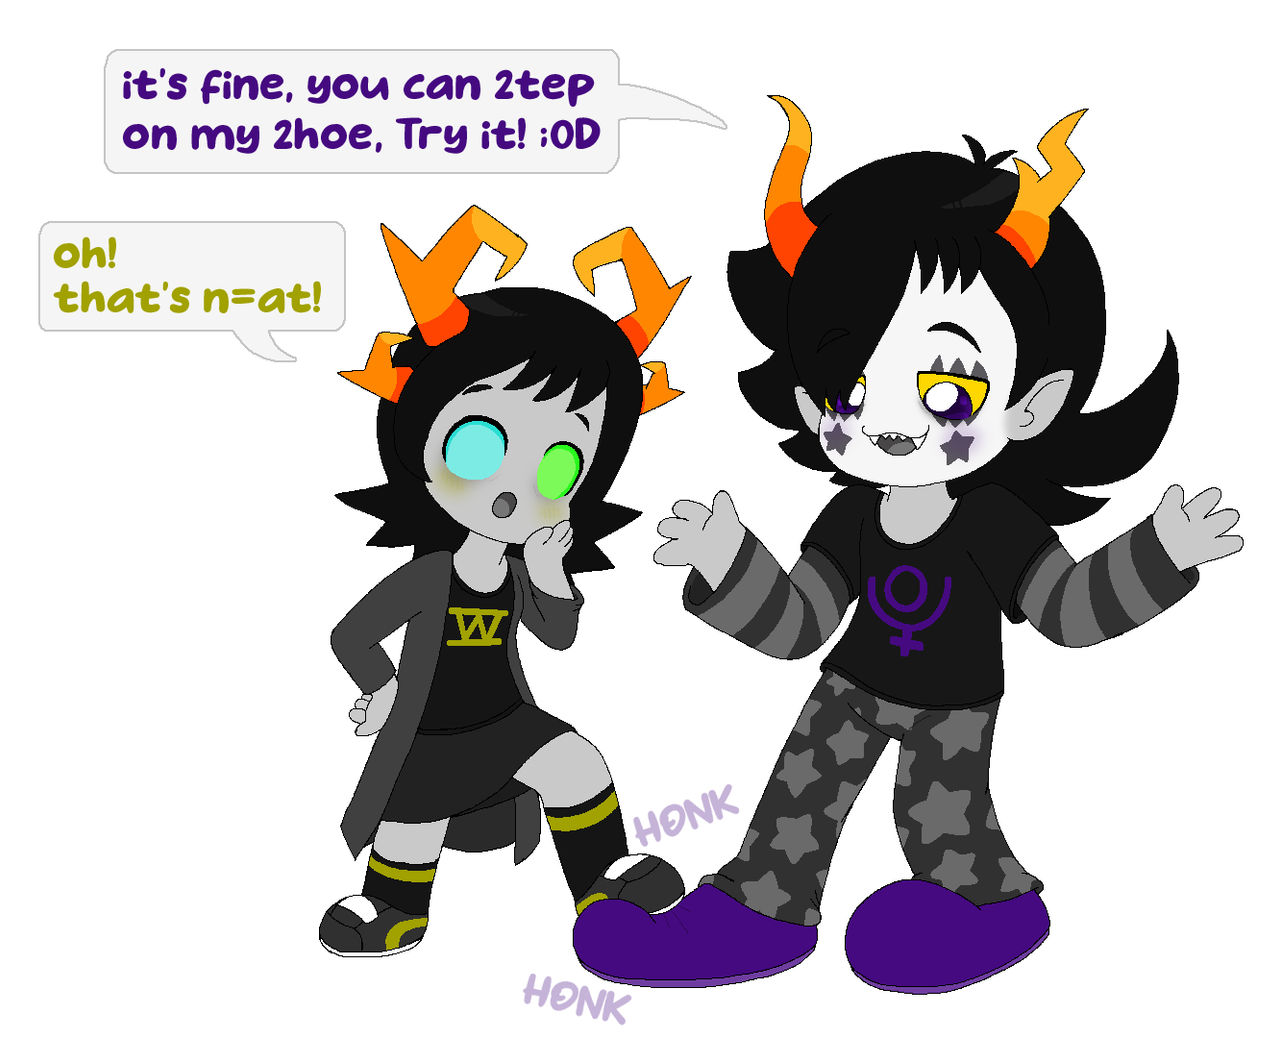 CheebStuck - Clown Shoes by Rotommowtom on DeviantArt